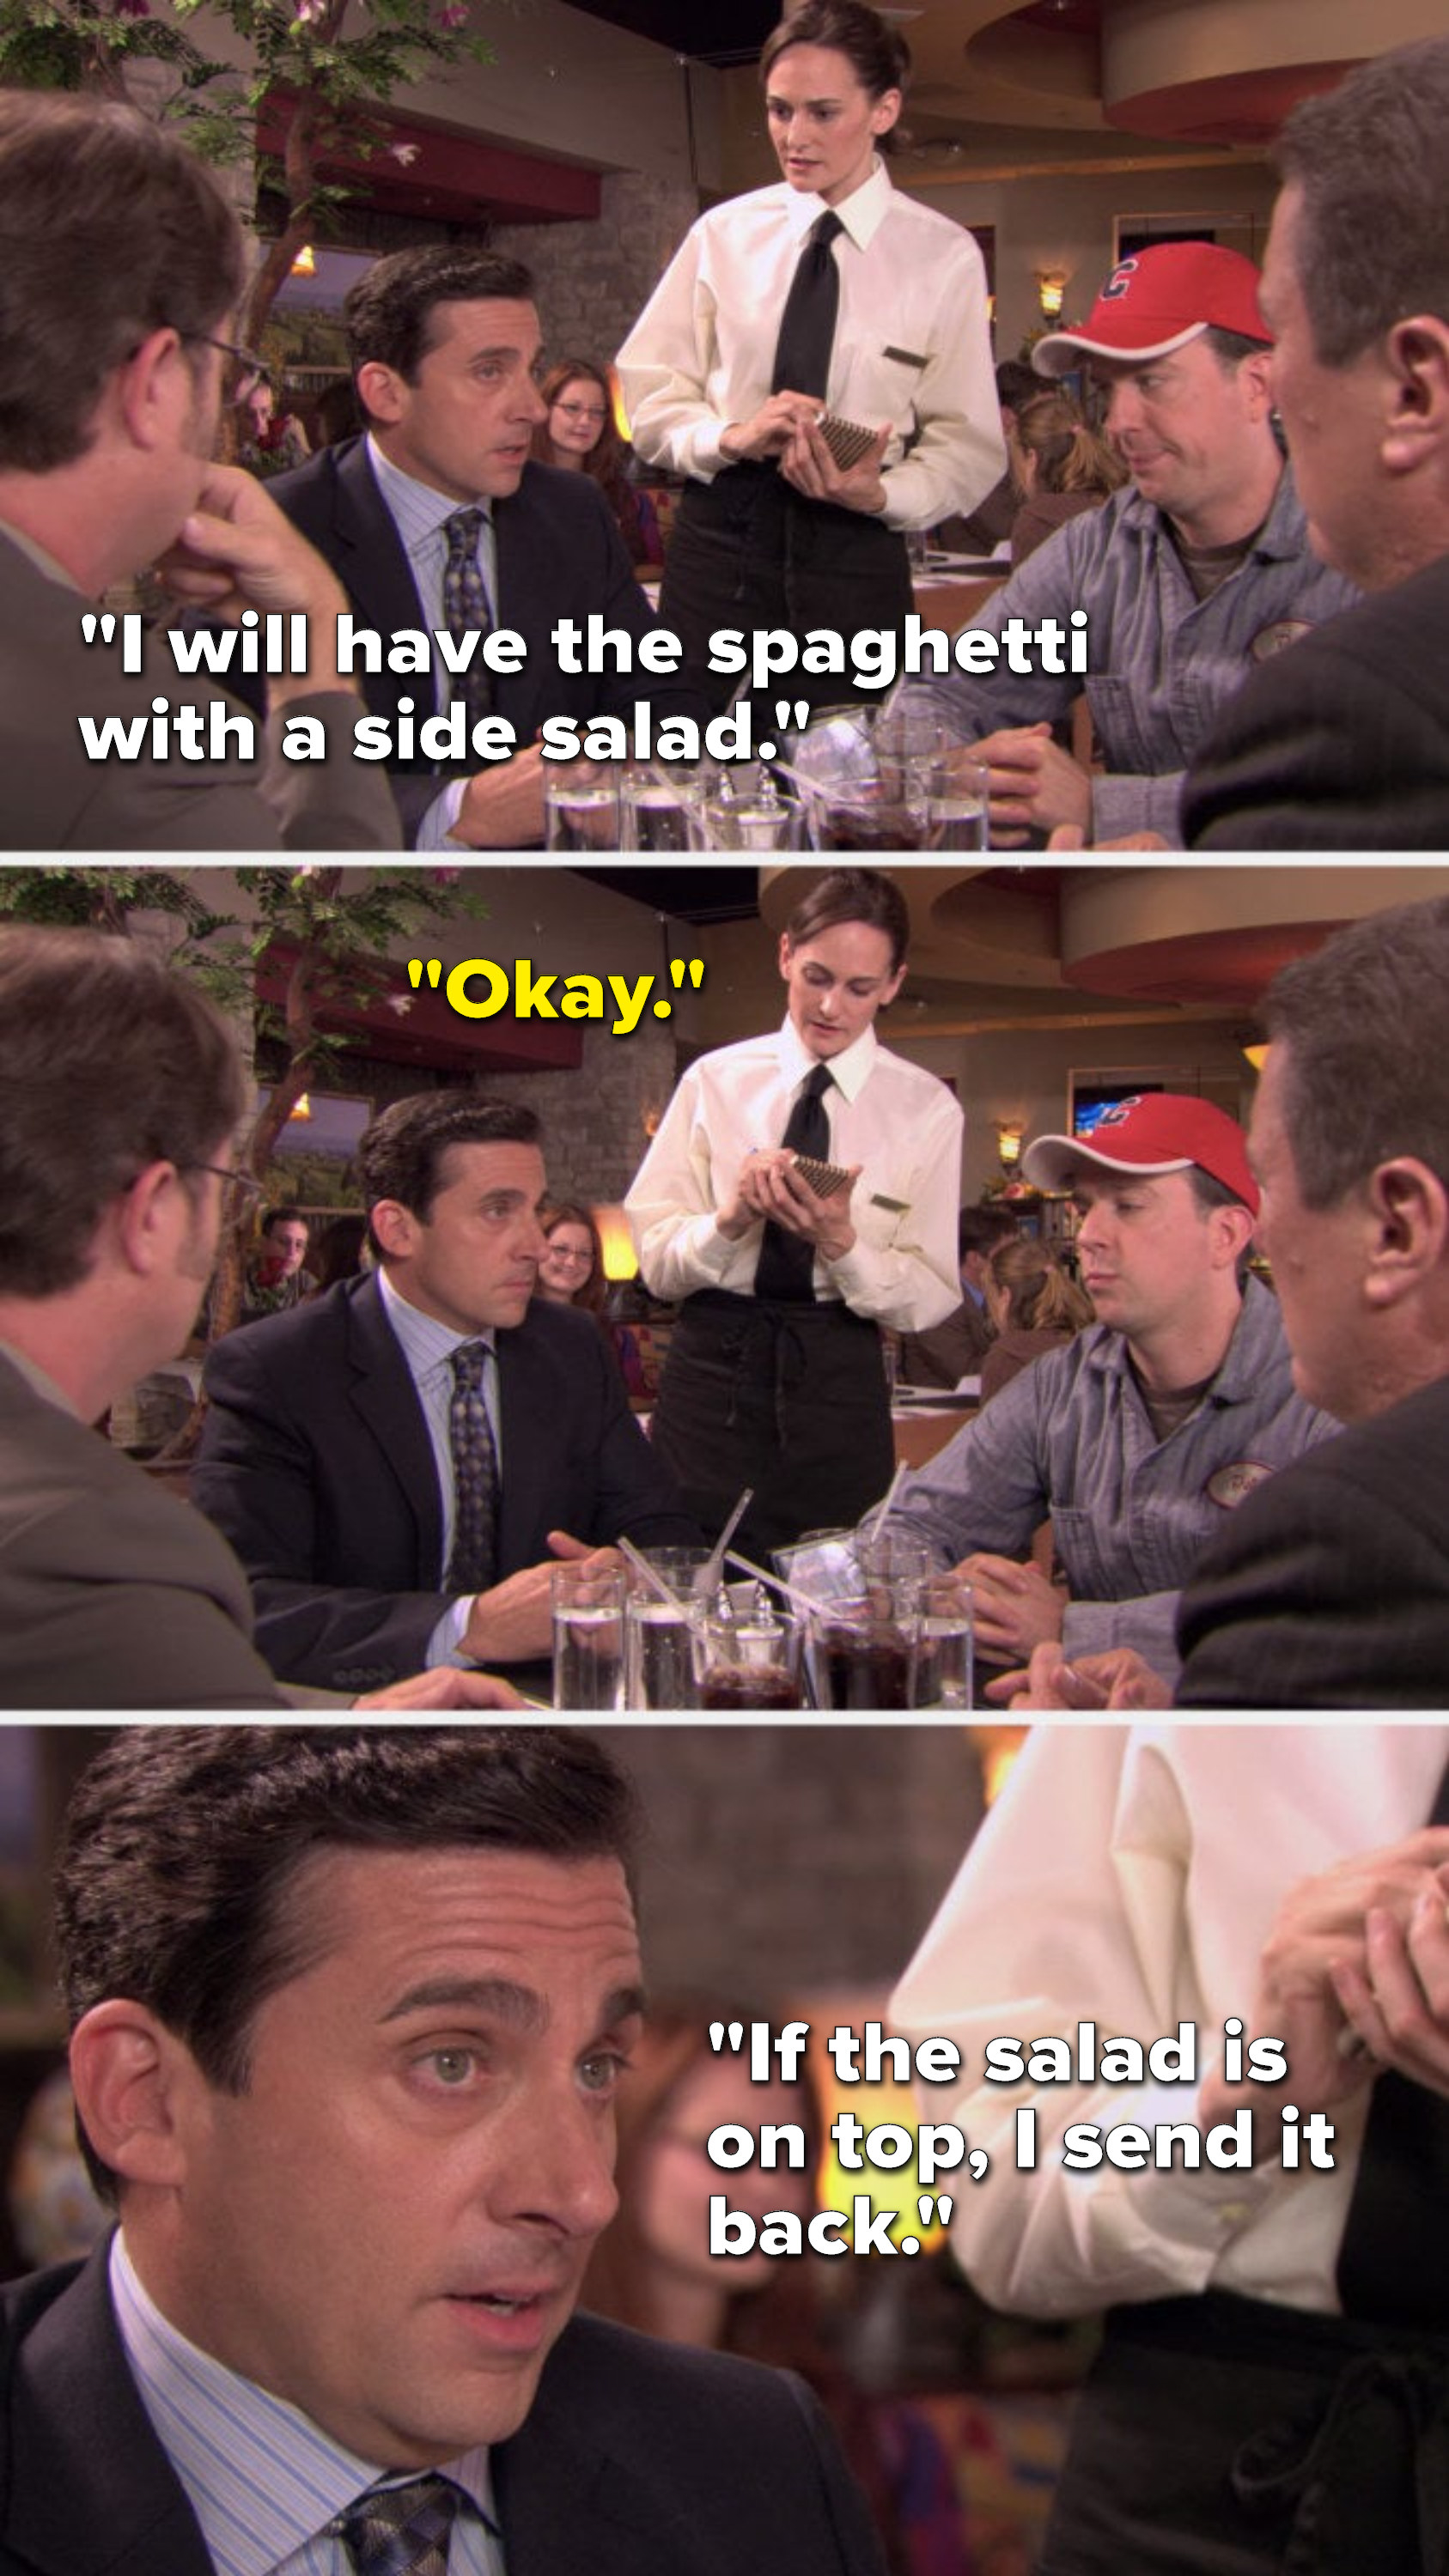 Michael says, &quot;I will have the spaghetti with a side salad,&quot; the serve says, &quot;Okay,&quot; and Michael says, &quot;If the salad is on top, I send it back&quot;